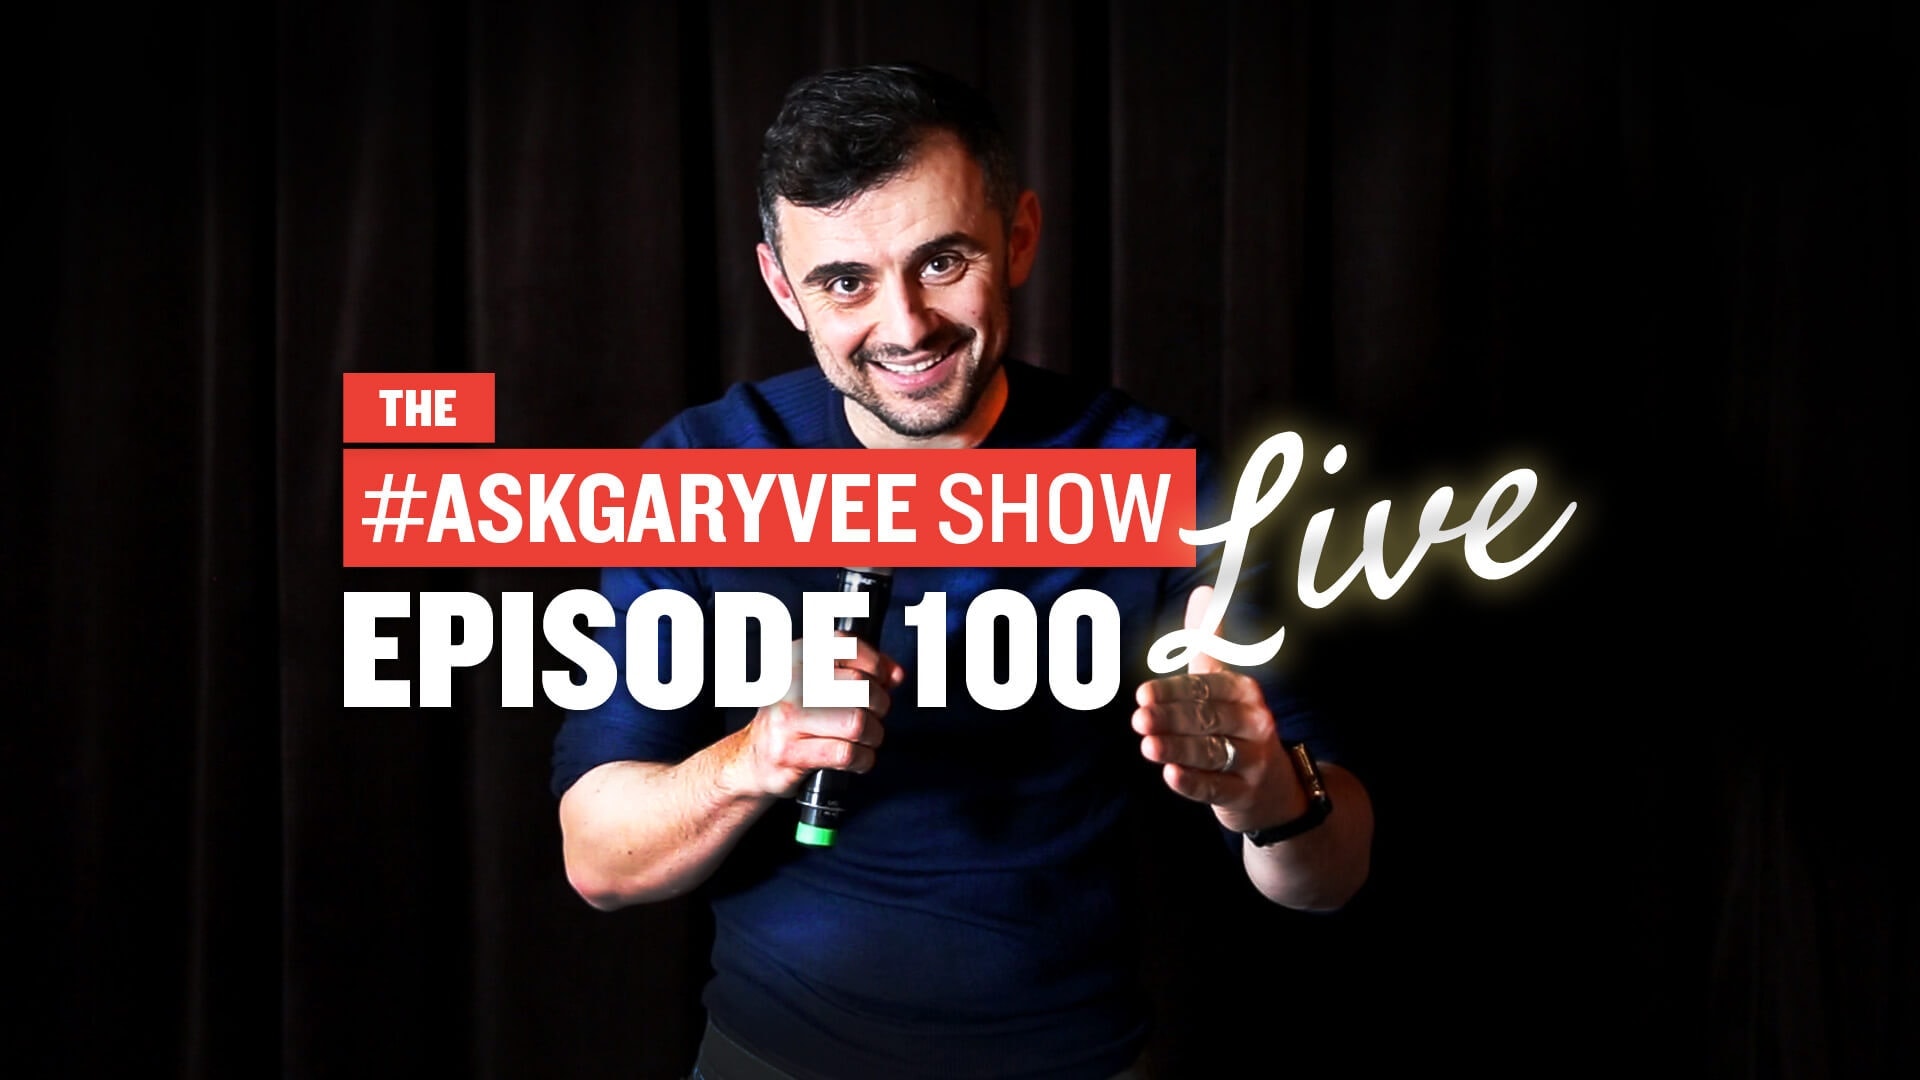 #AskGaryVee Episode 100: The Live Show [UNCENSORED]